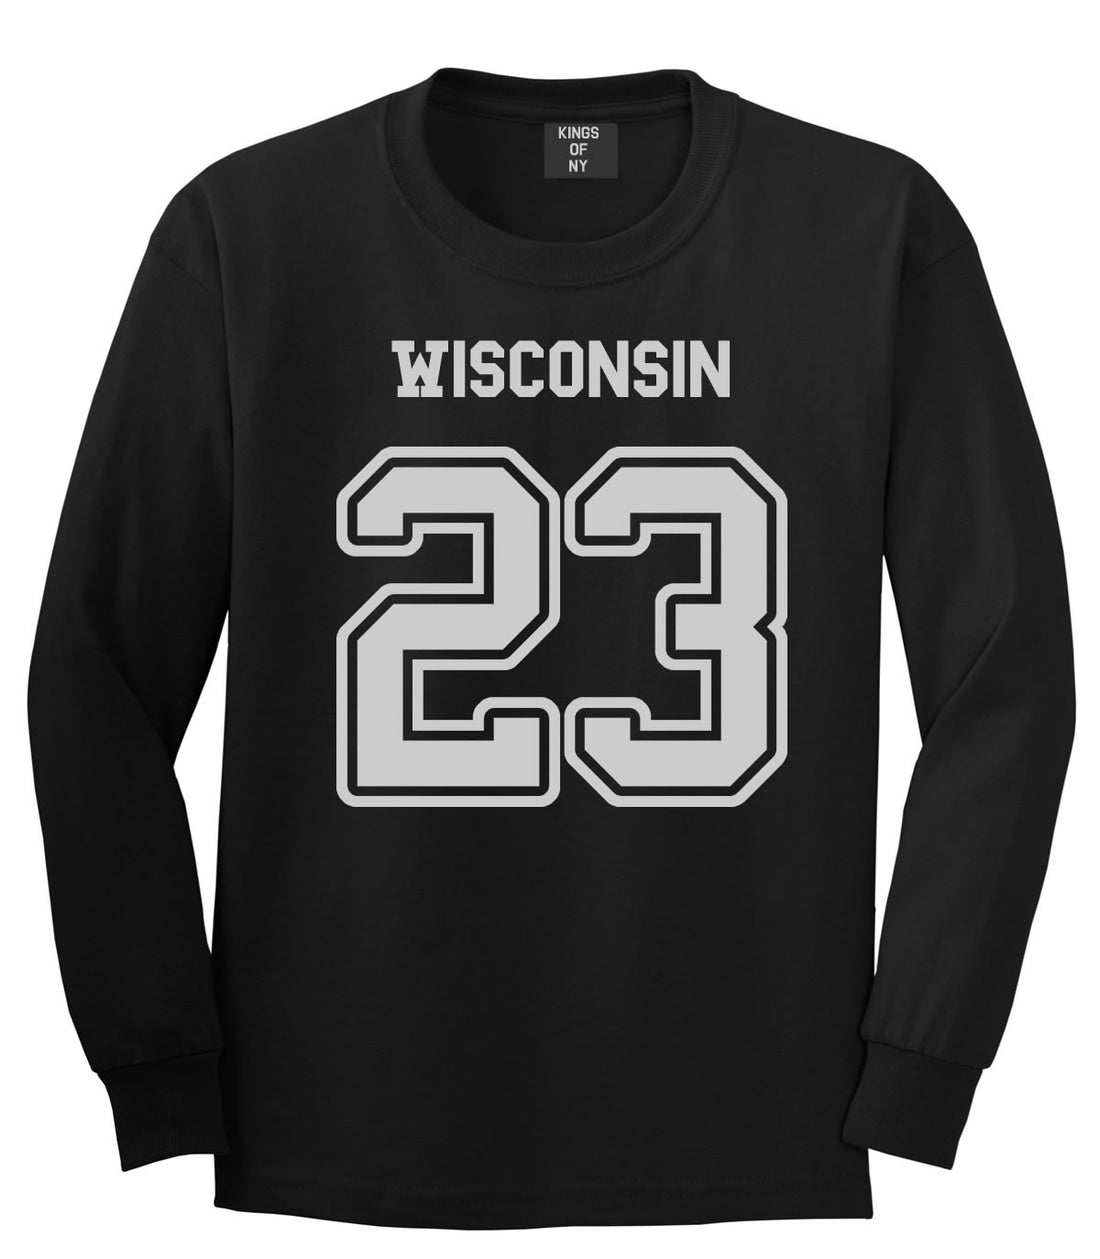 Sport Style Wisconsin 23 Team State Jersey Long Sleeve T-Shirt By Kings Of NY